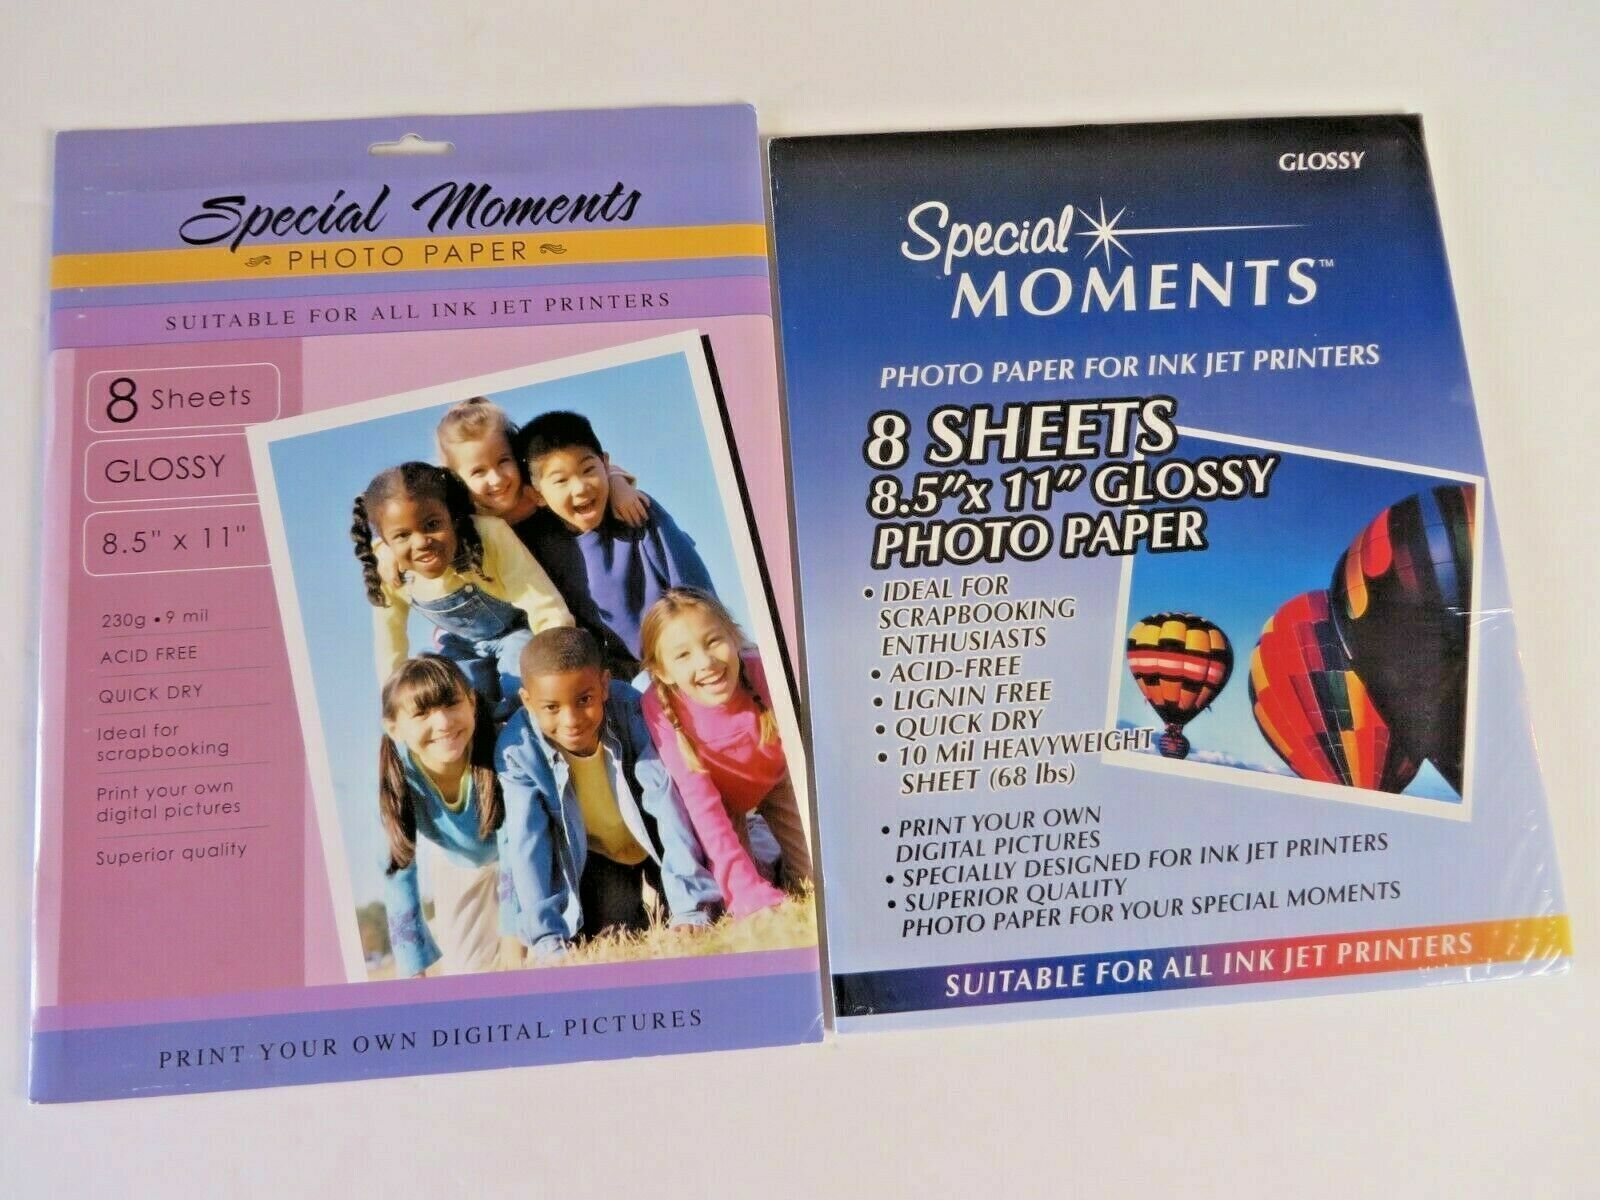 Special Moments Photo Paper 8 Sheets Glossy Photo Paper Lot of 2 Pkg  #2945